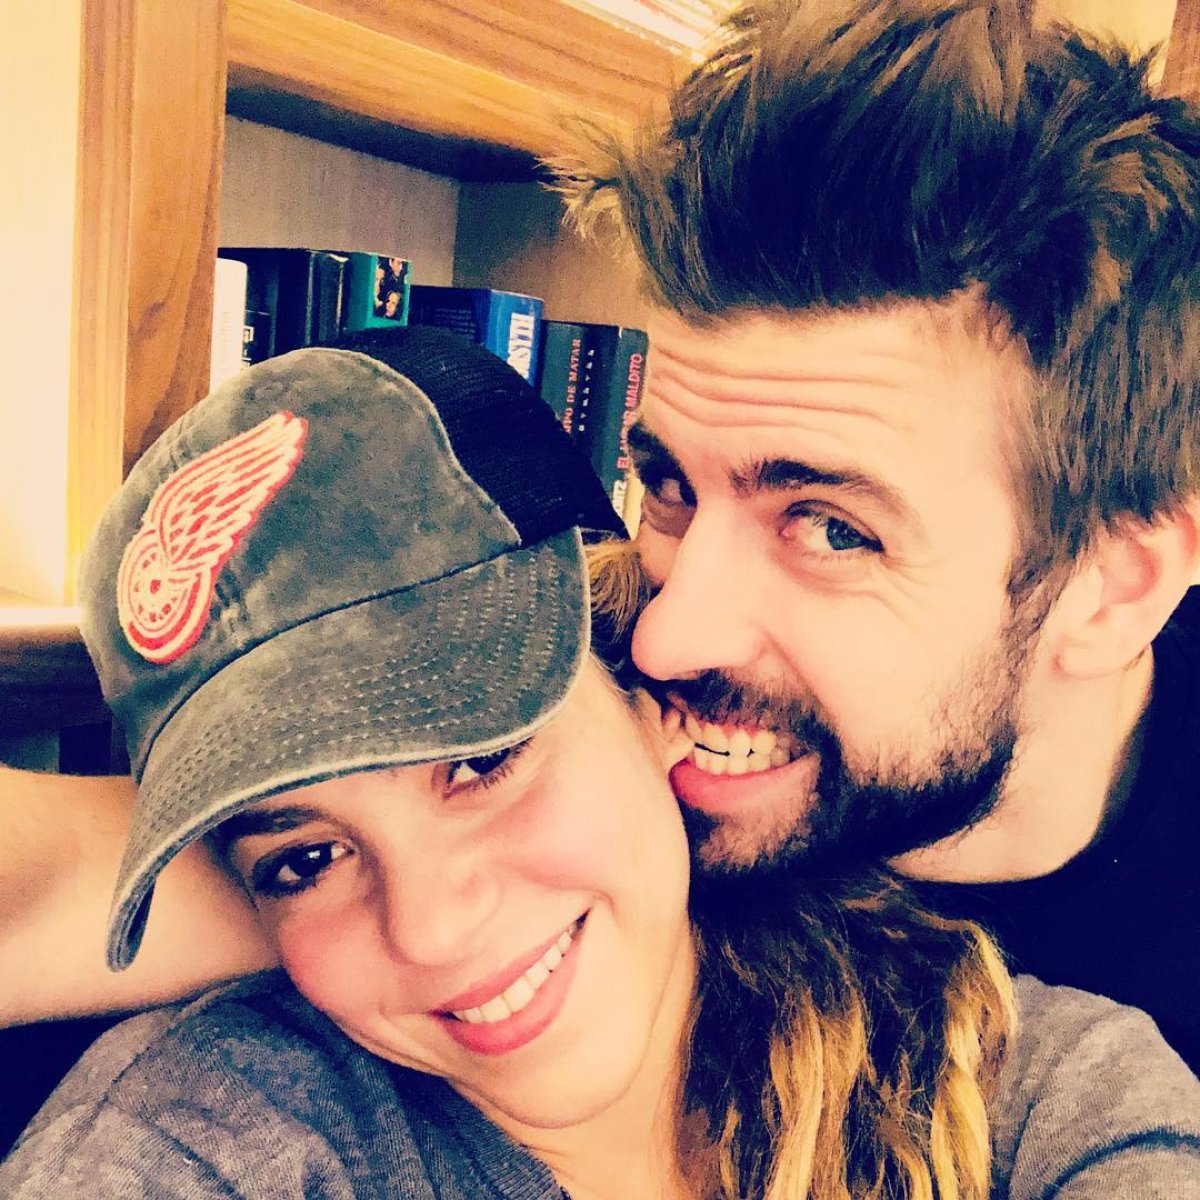 Praise from Shakira to Pique #5